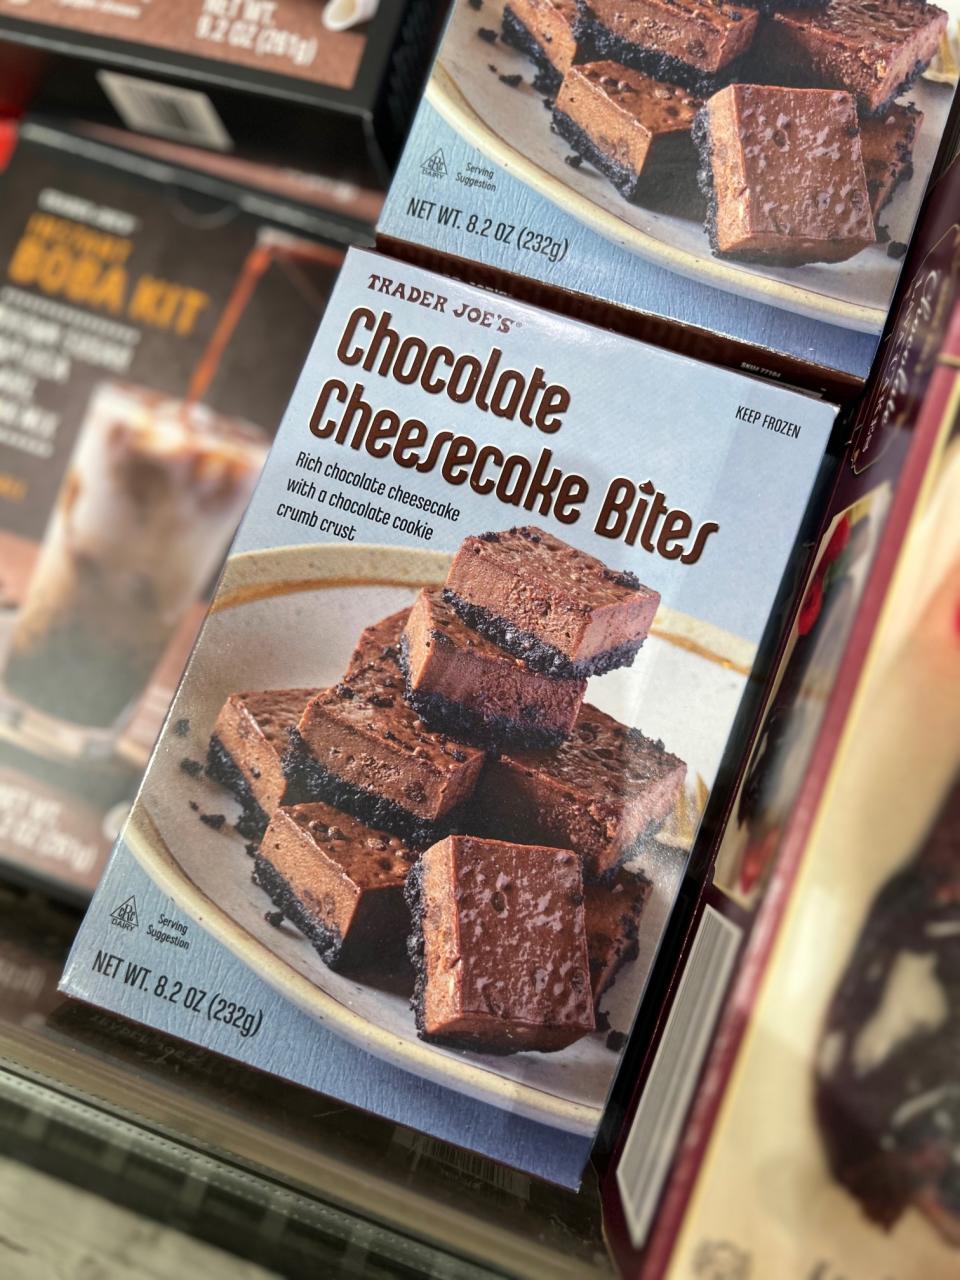 Box of Trader Joe's Chocolate Cheesecake Bites with image of dessert on packaging